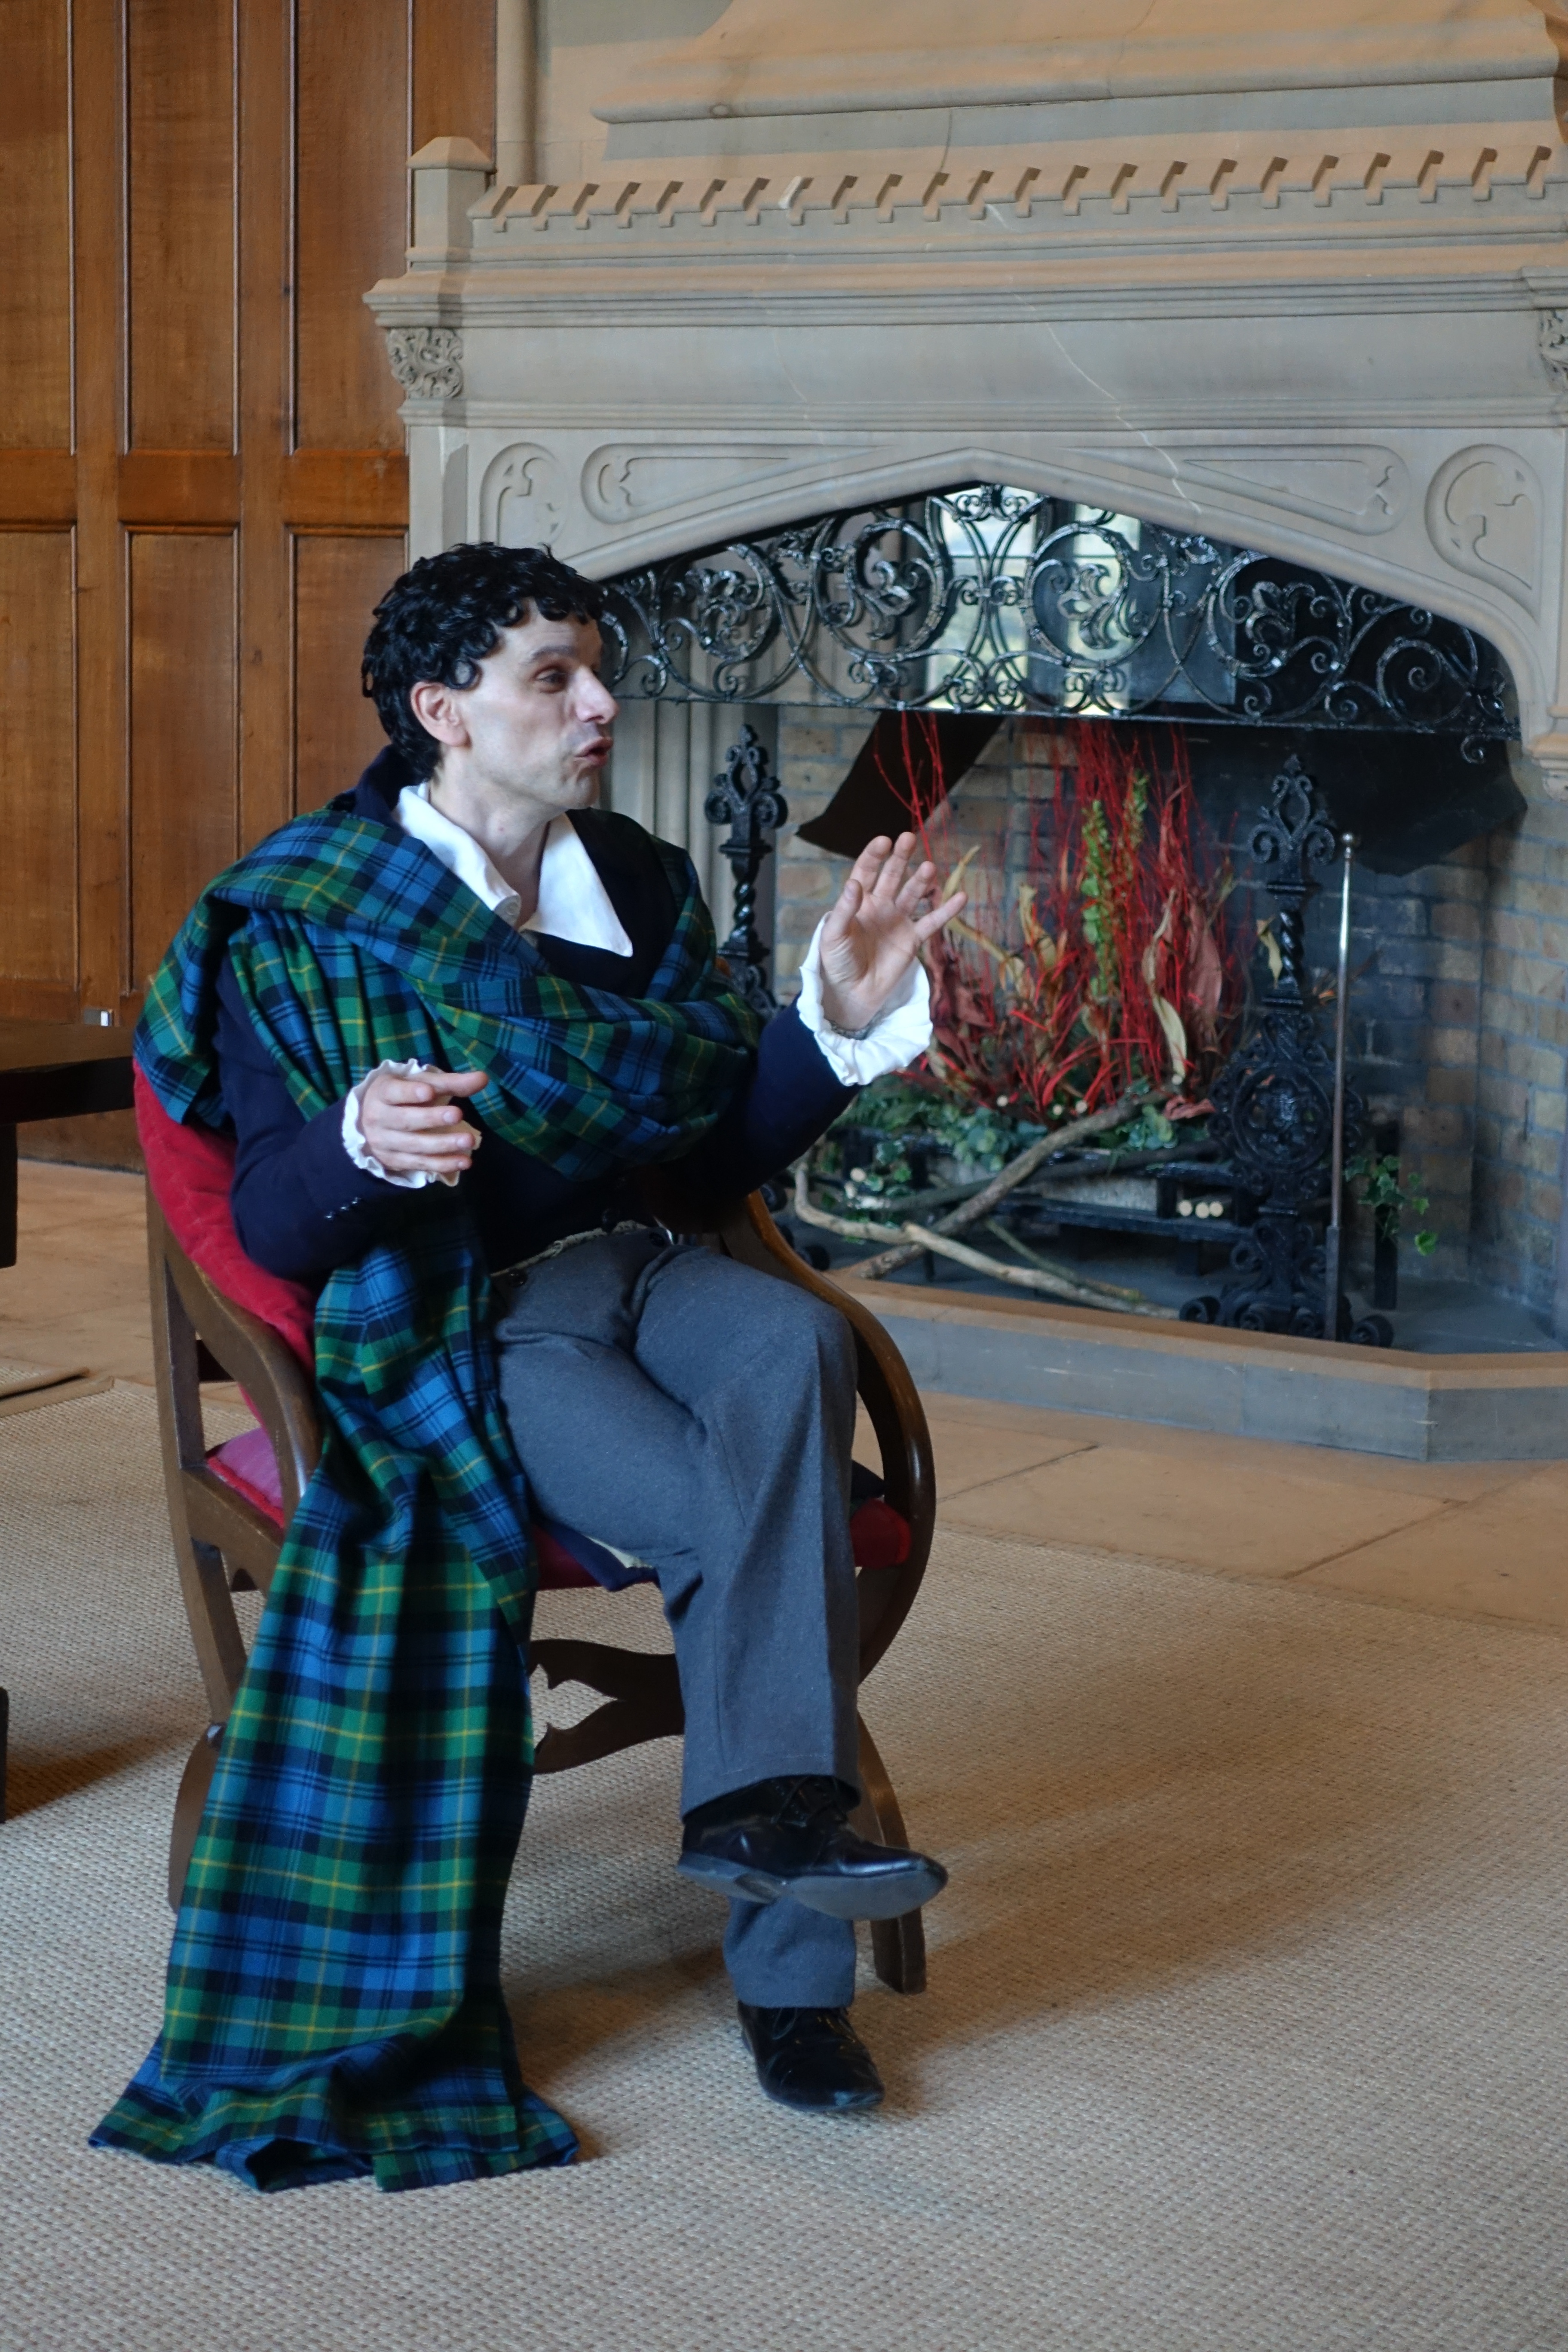 "Lord Byron" costumed guide at Newstead Abbey - photo by Juliamaud